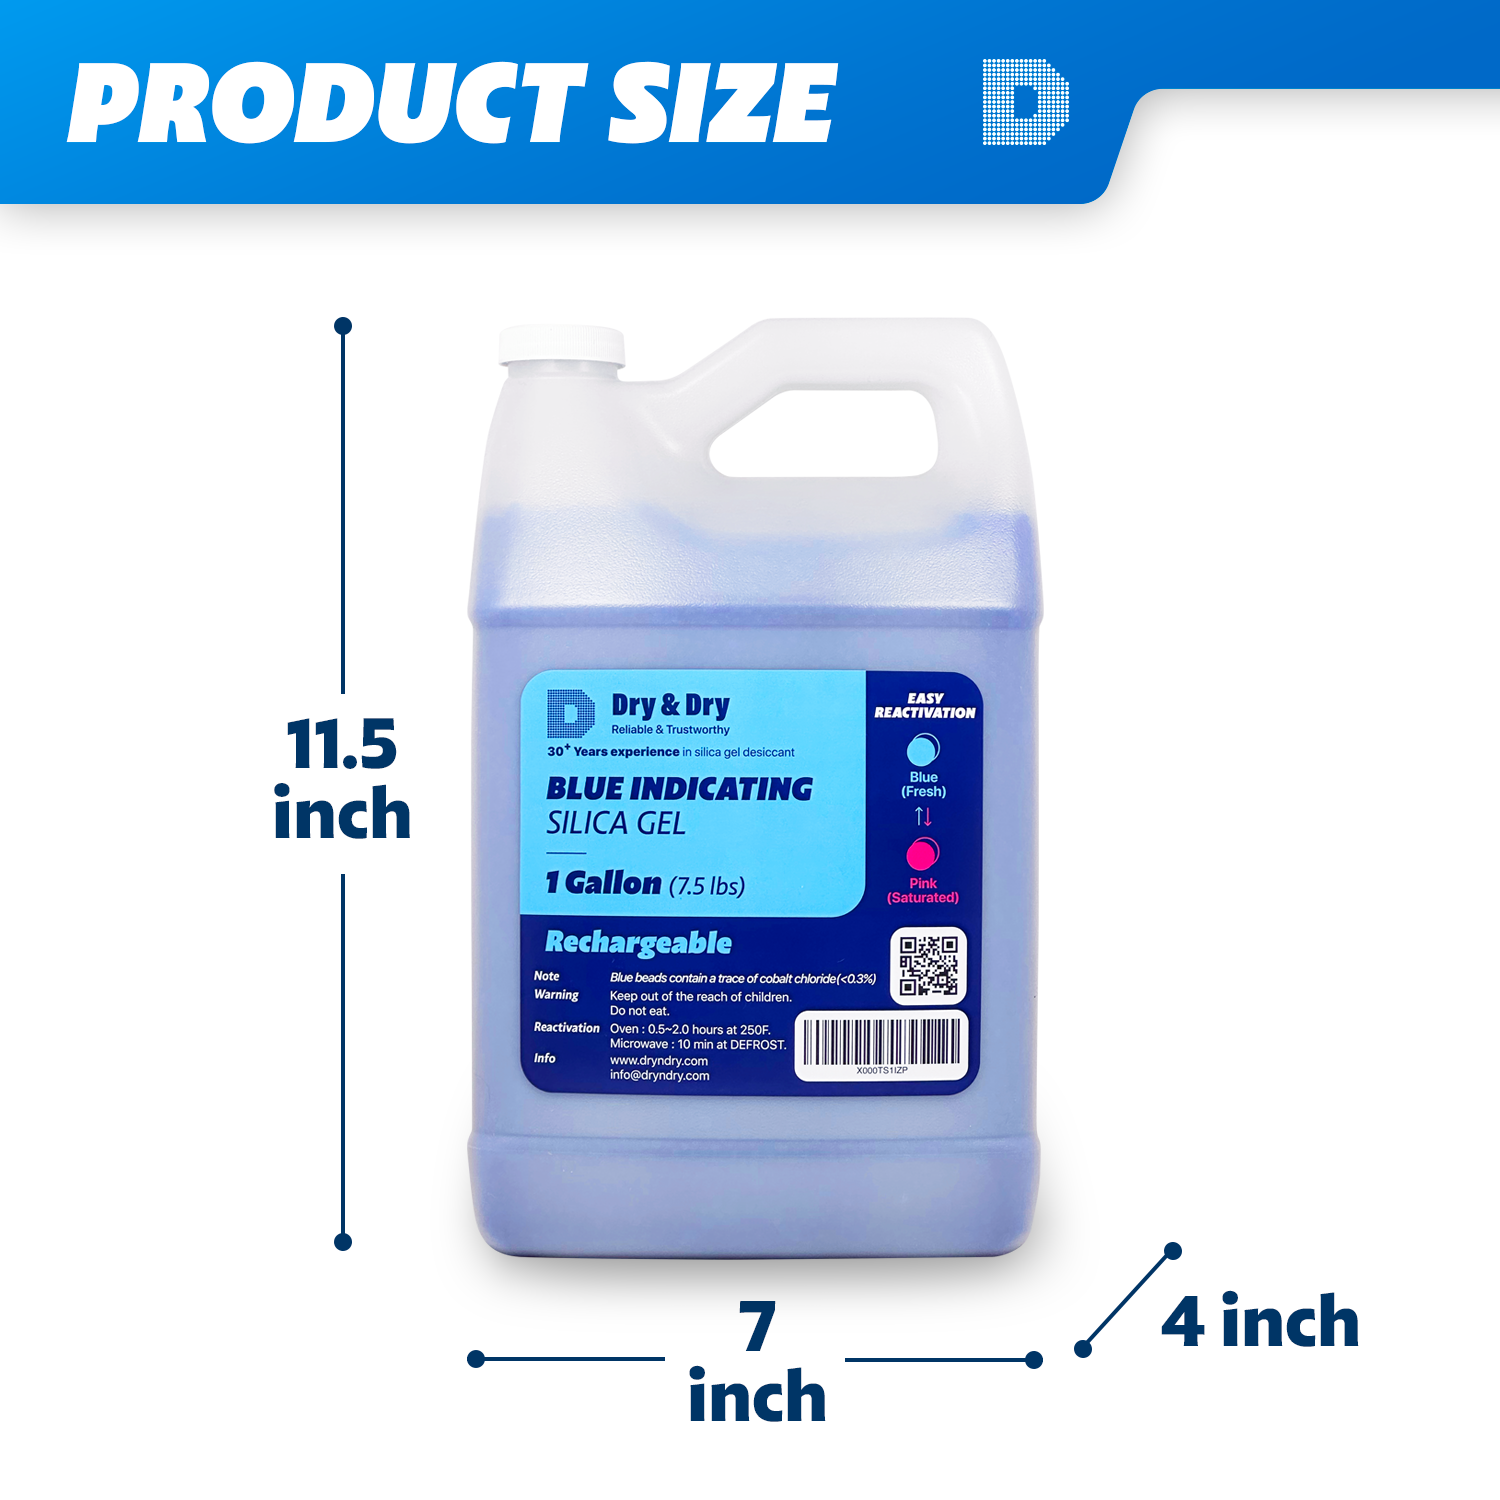 2 Gallon(15 LBS) "Dry & Dry" Premium Blue Indicating Silica Gel Beads - Rechargeable Beads(3-5 mm)